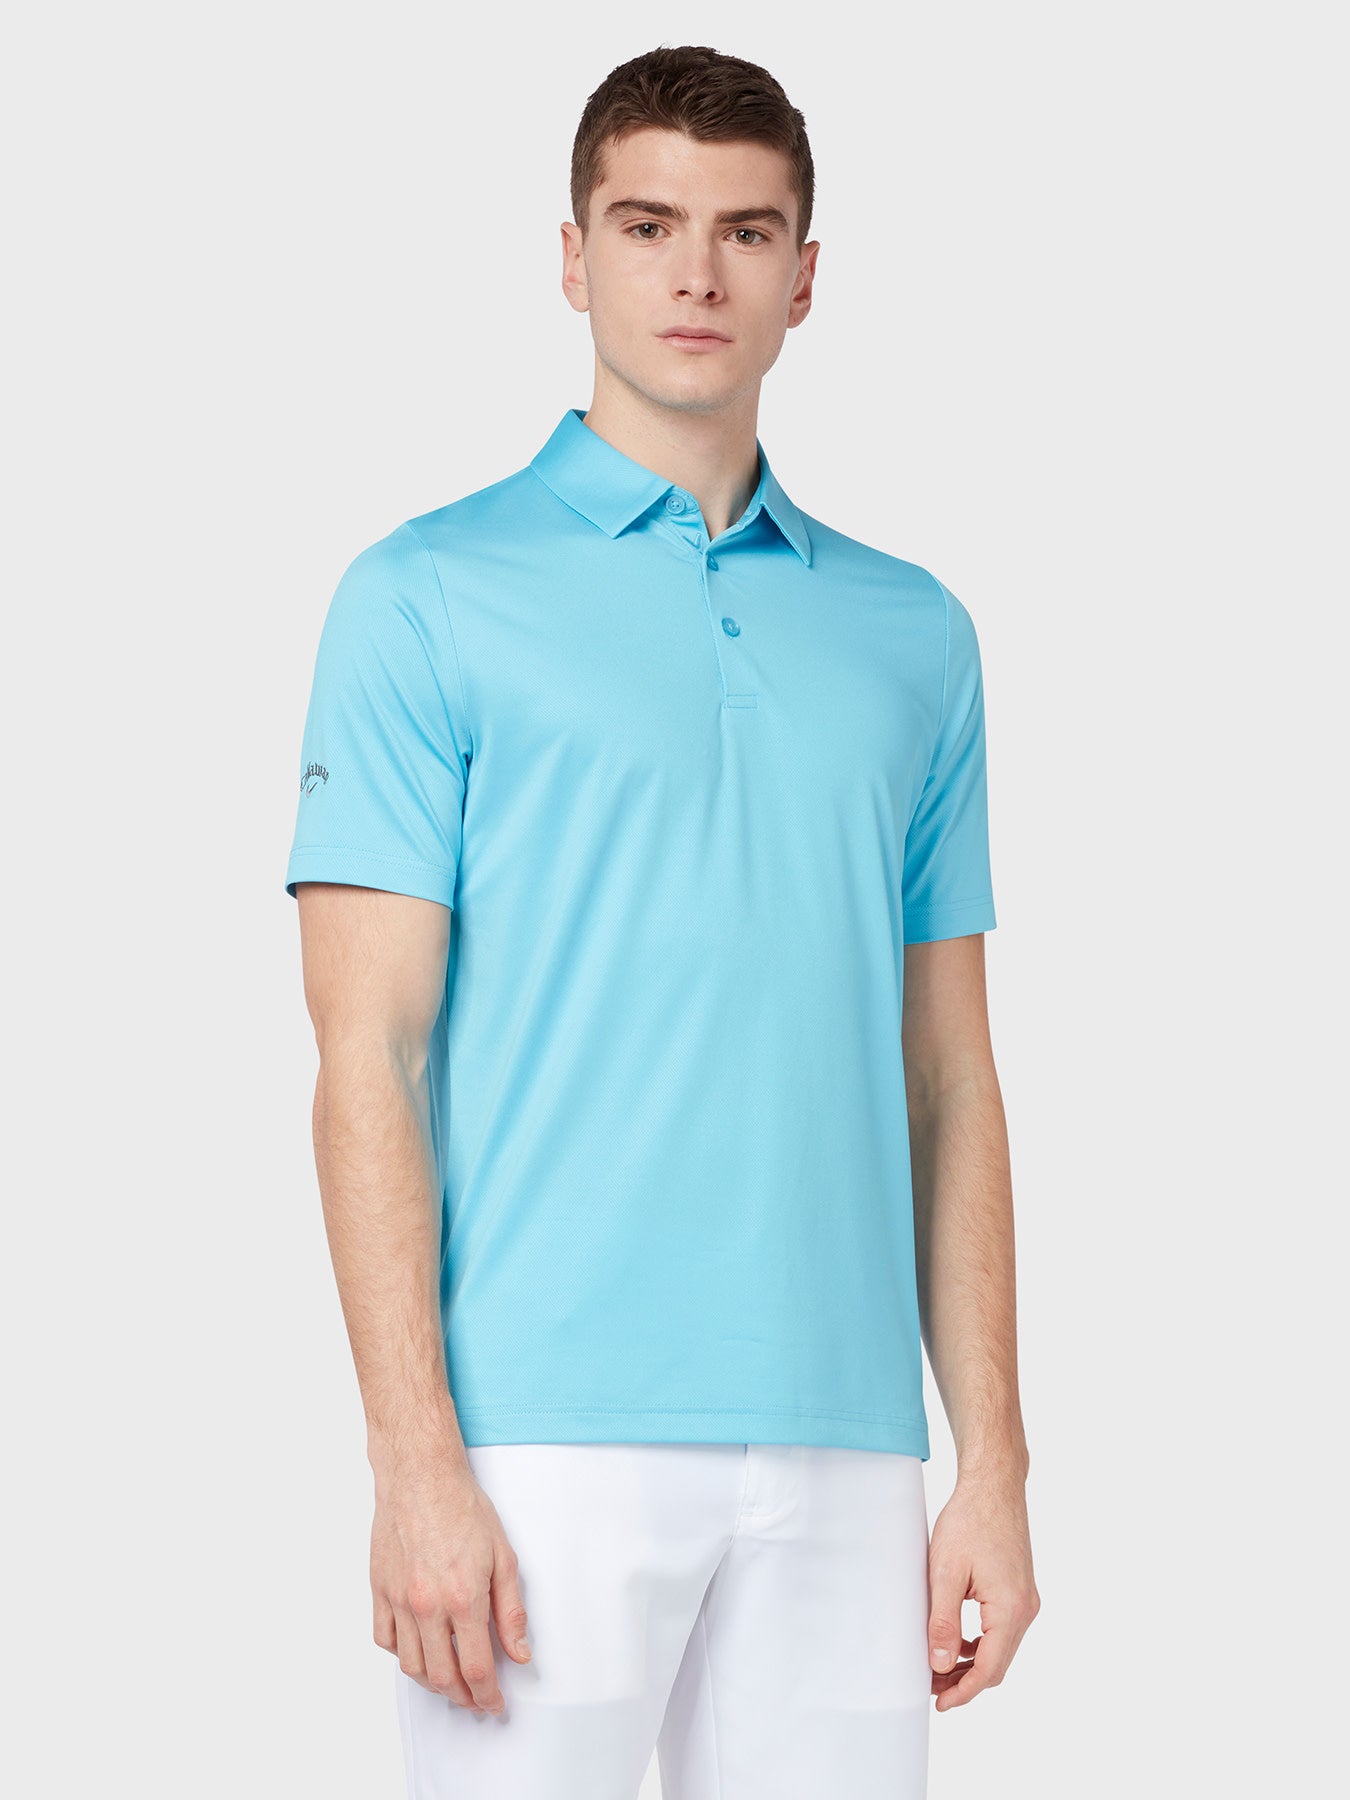 View Swing Tech Tour Polo In Blue Grotto Blue Grotto XS information